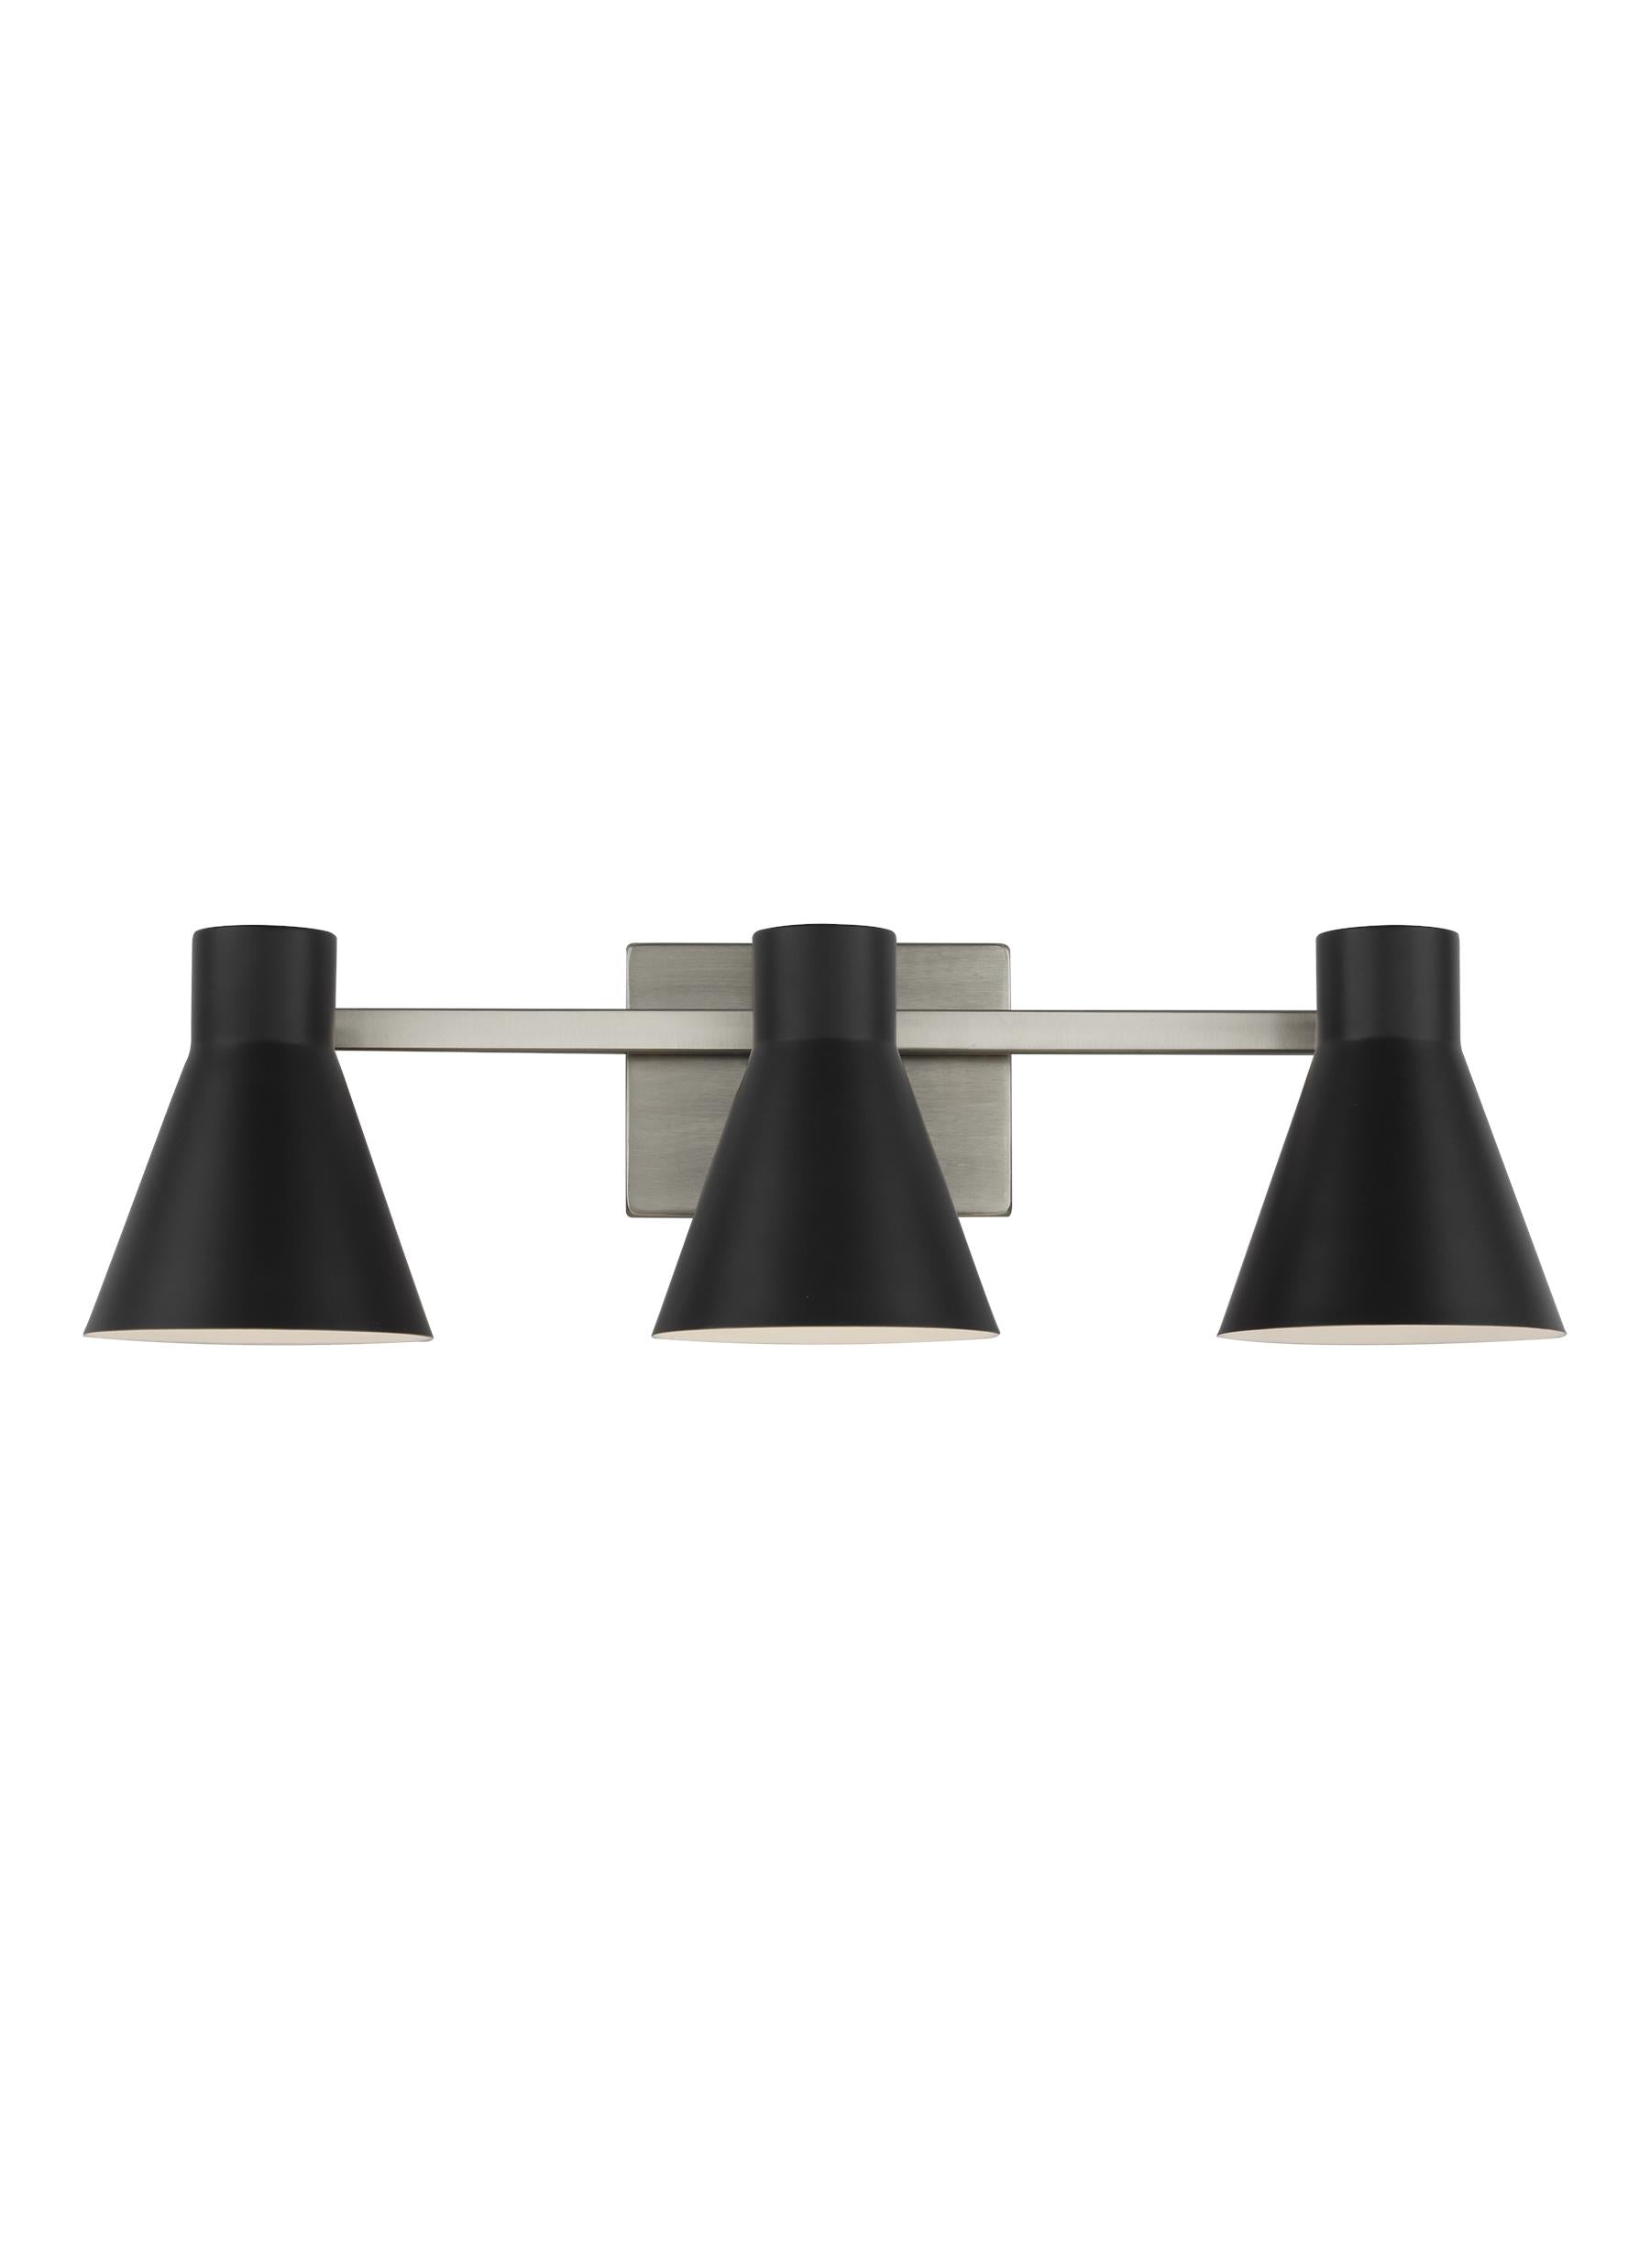 Towner Three Light Wall Sconce Sea Gull Collection